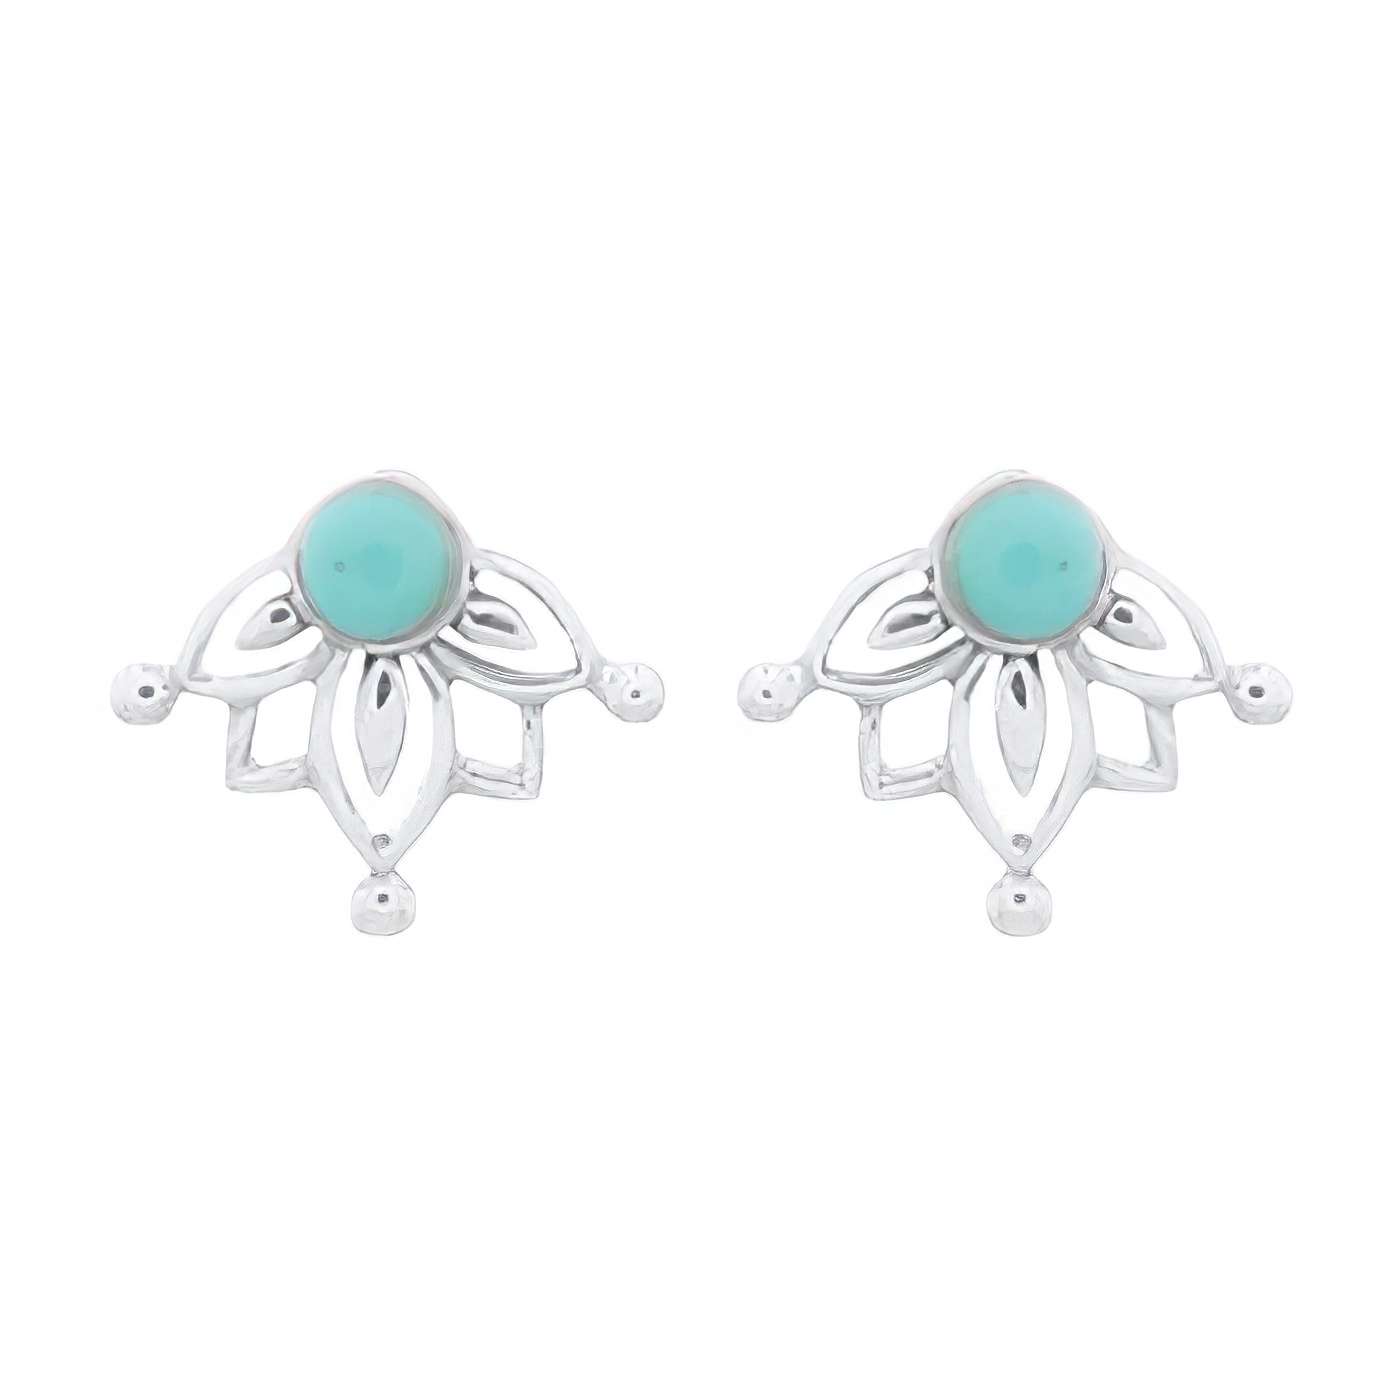 Reconstituted Turquoise Little Lotus 925 Silver Stud Earrings by BeYindi 